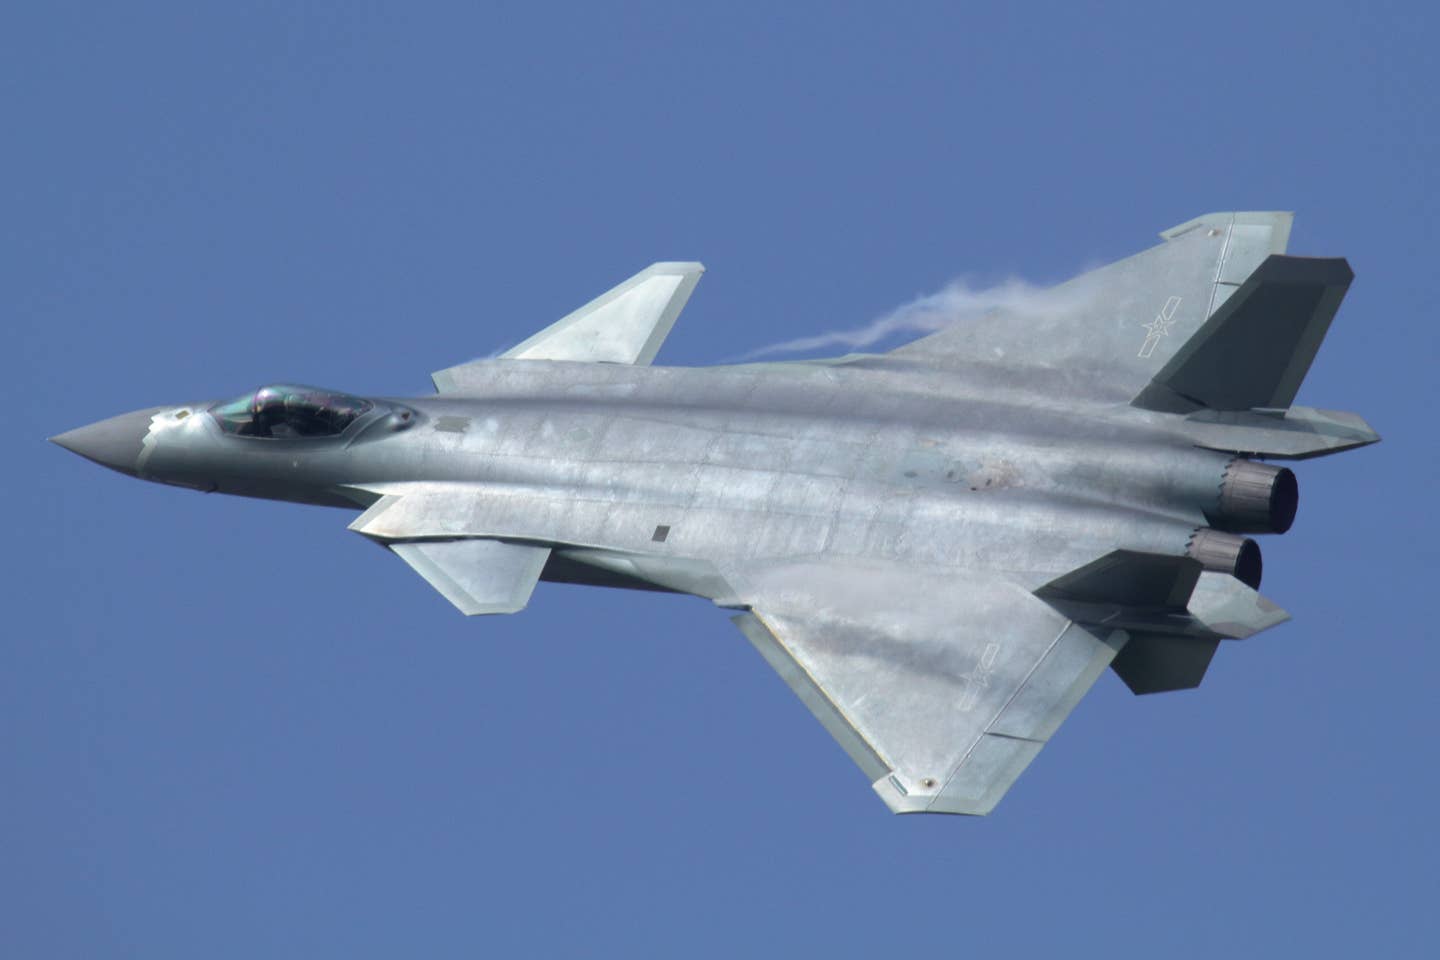 Flypast of the Chengdu J-20 during the opening of Airshow China in Zhuhai, 2016. <em>Alert5 via Wikimedia Commons</em>